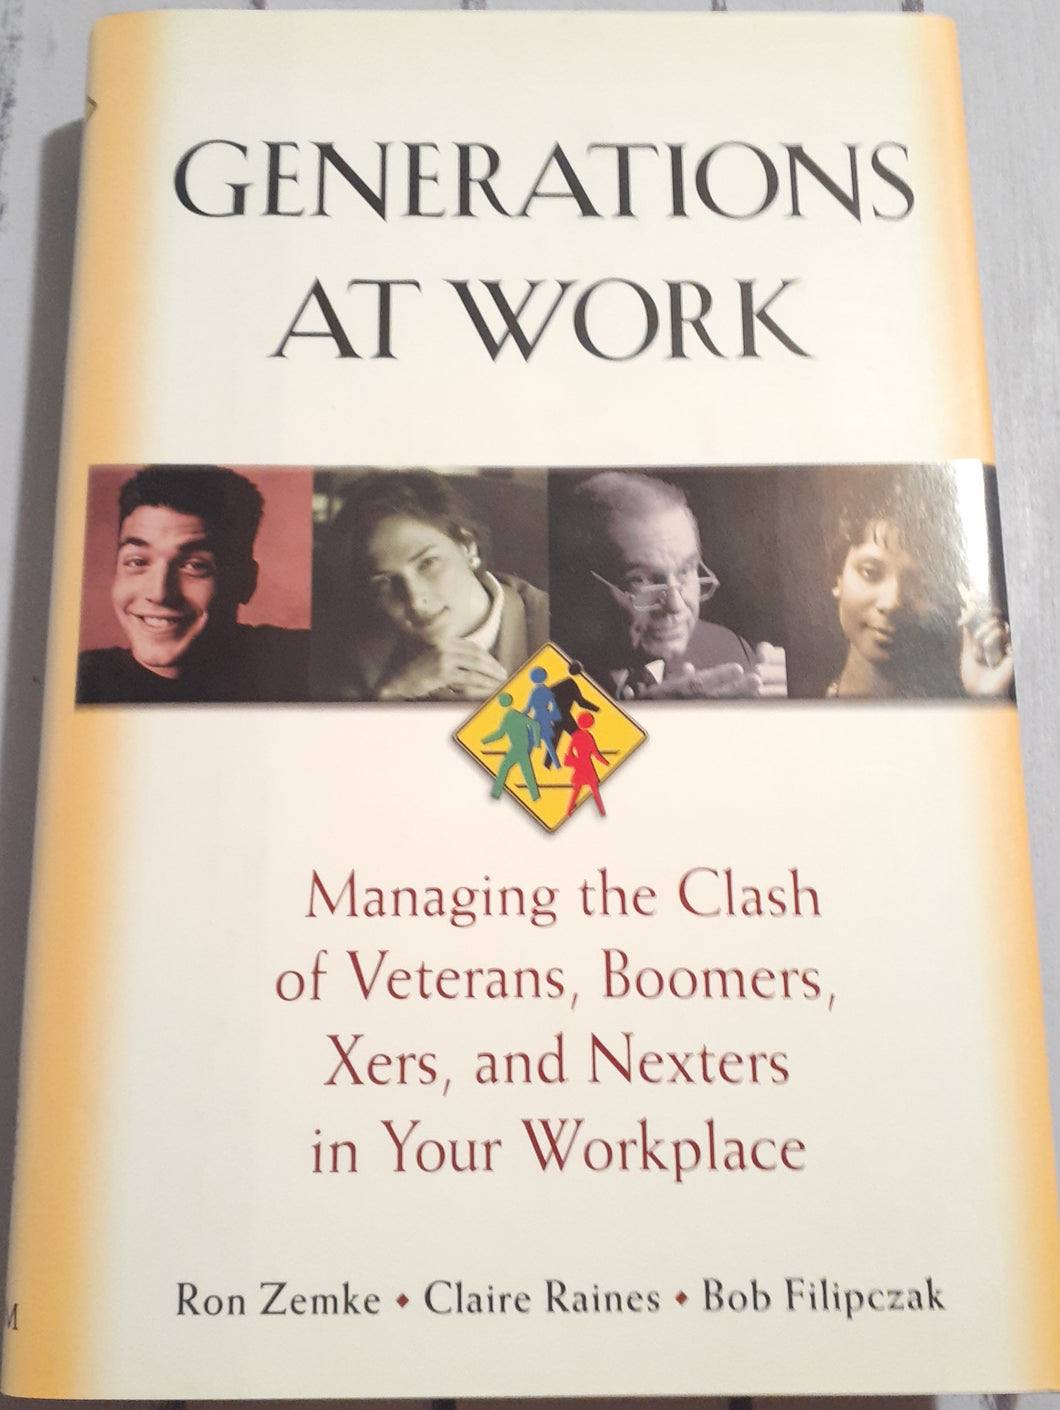 Generations at Work: Managing the Clash of Veterans, Boomers, Gen Xers, and Nexters in your Workplace